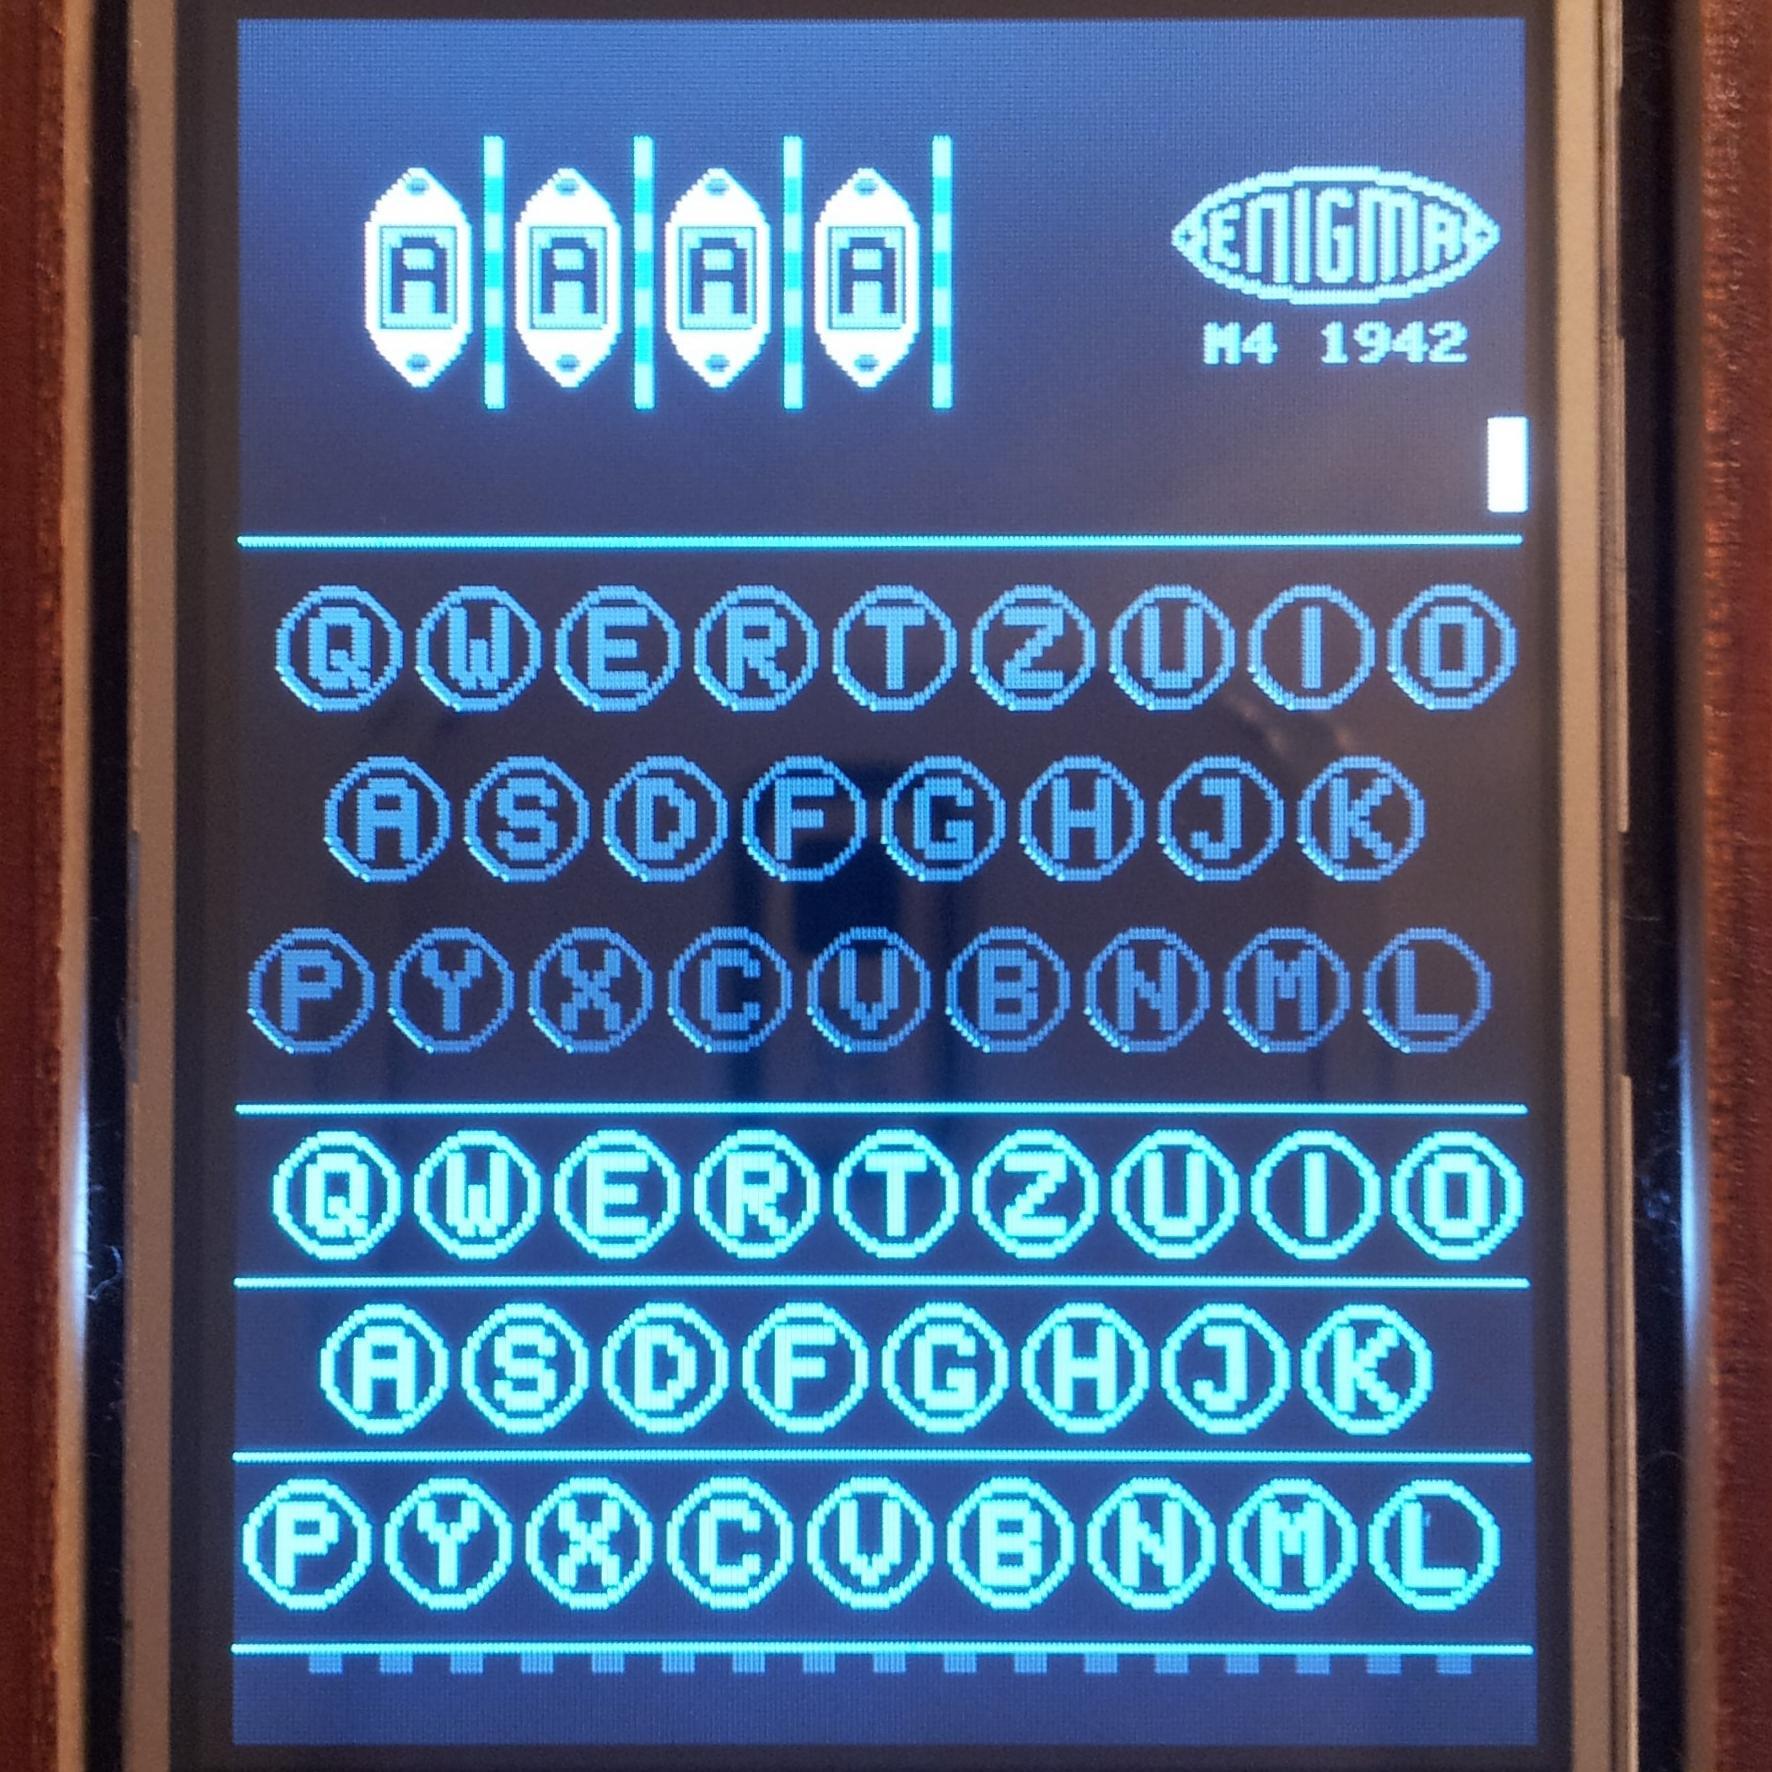 Get your own enigma machine simulator or use the enigma engine source code provided to create your own.